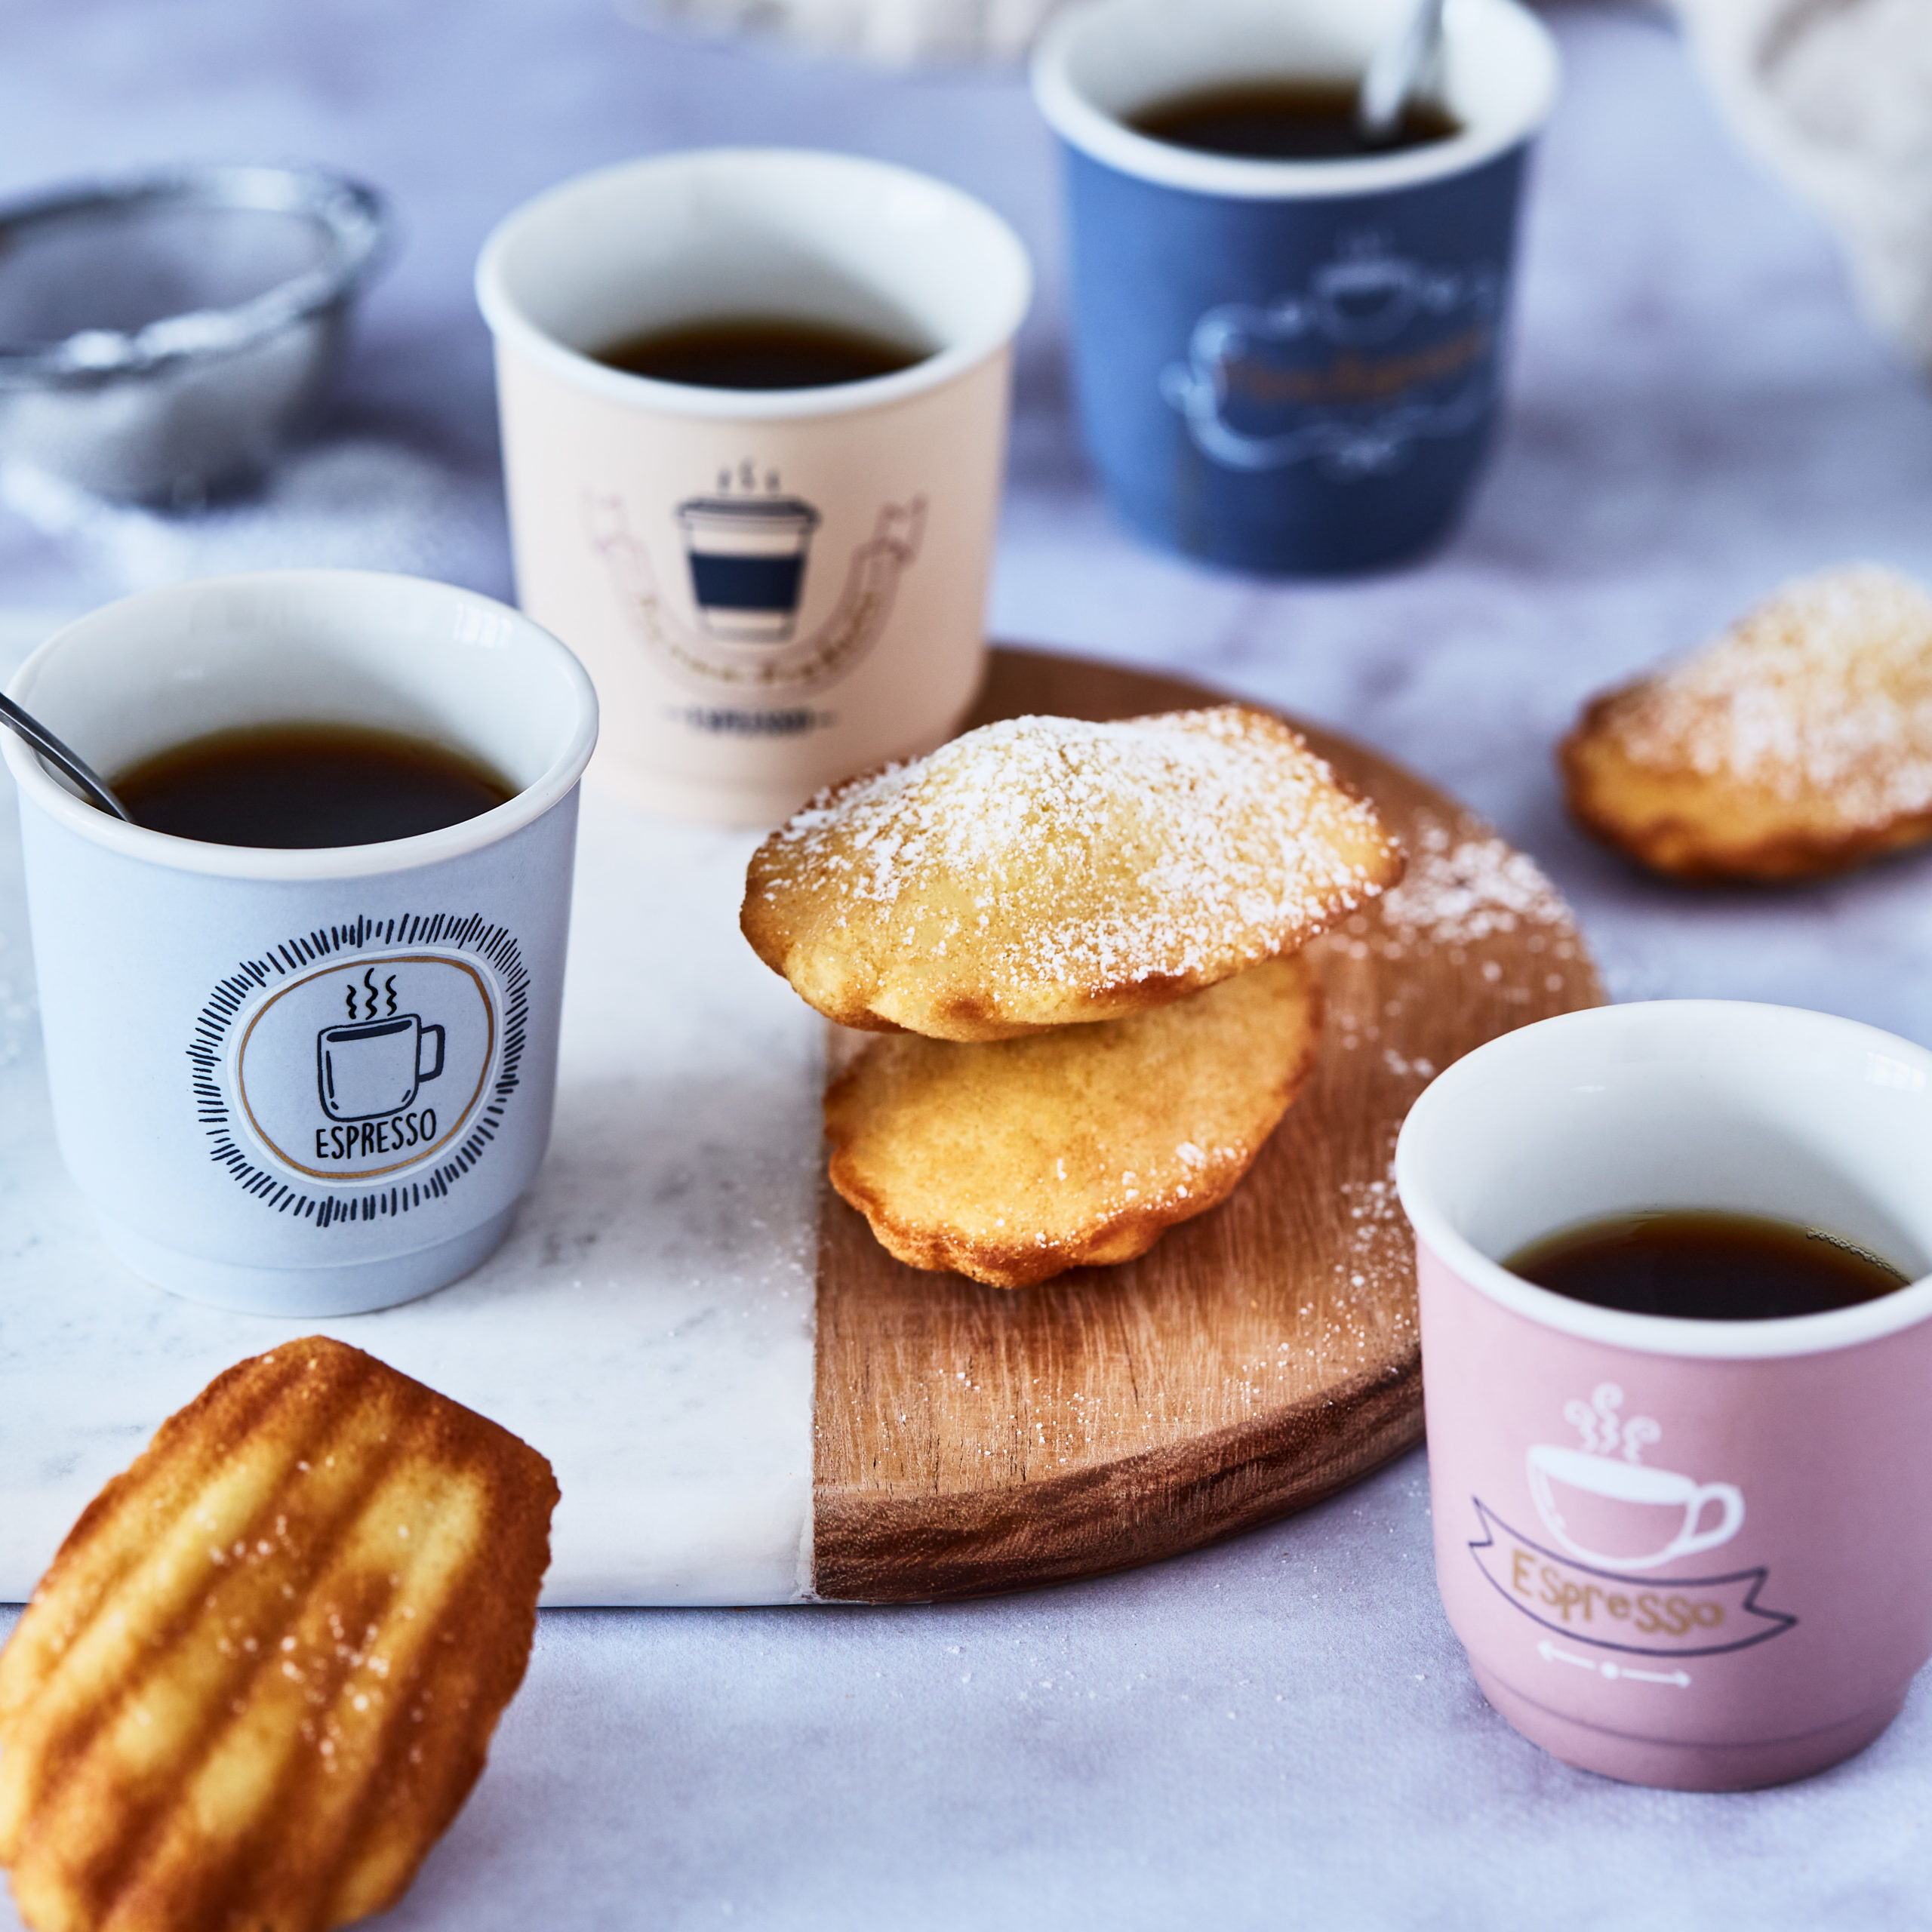 COFFRET PAUSE CAFE - Moments gourmands 2022